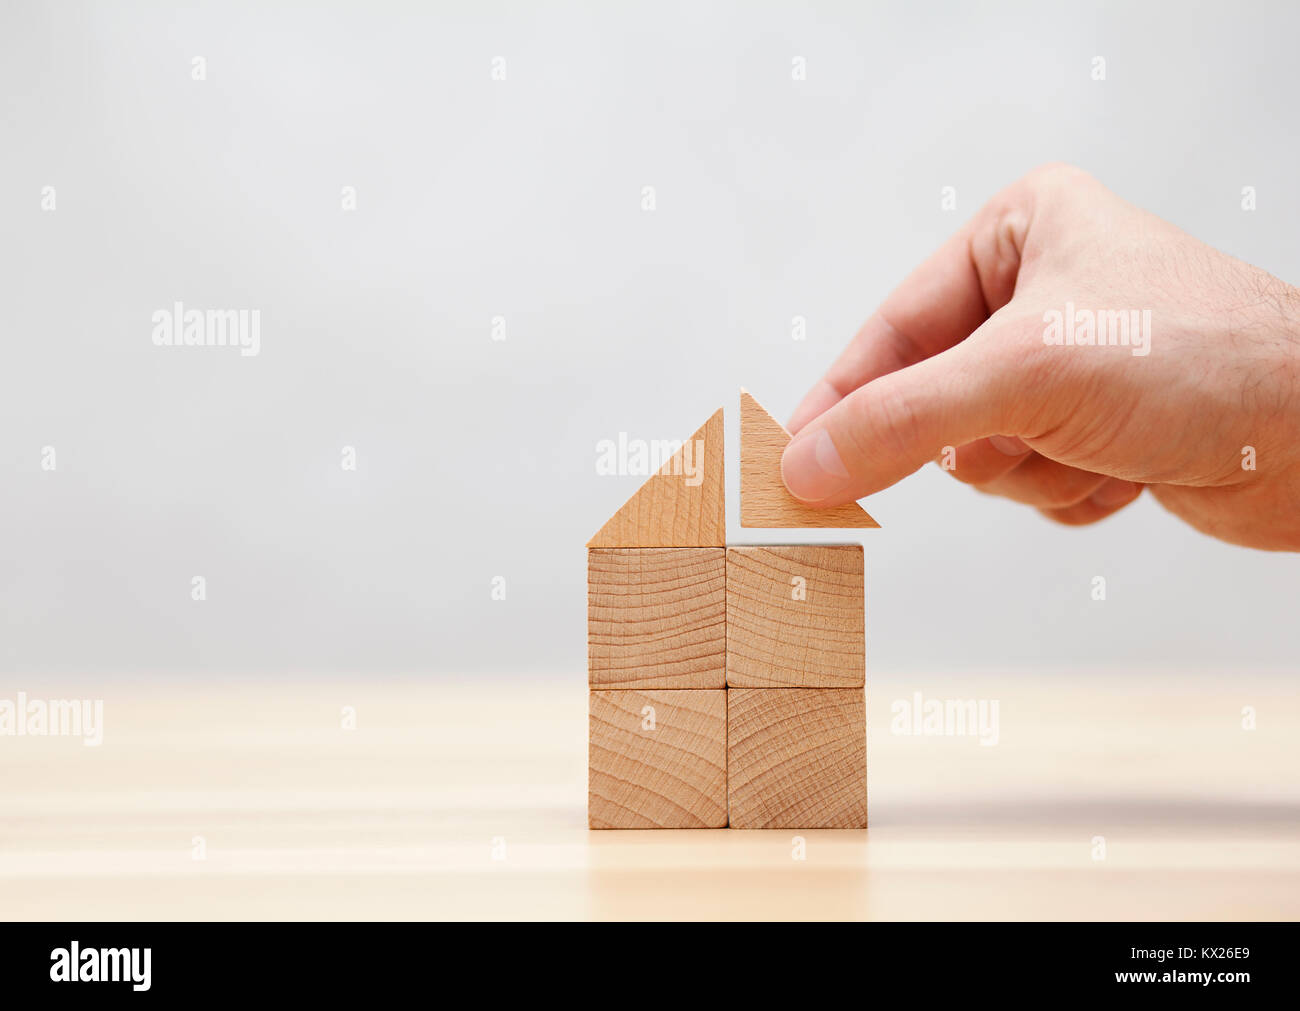 Hand building house with wooden blocks Stock Photo